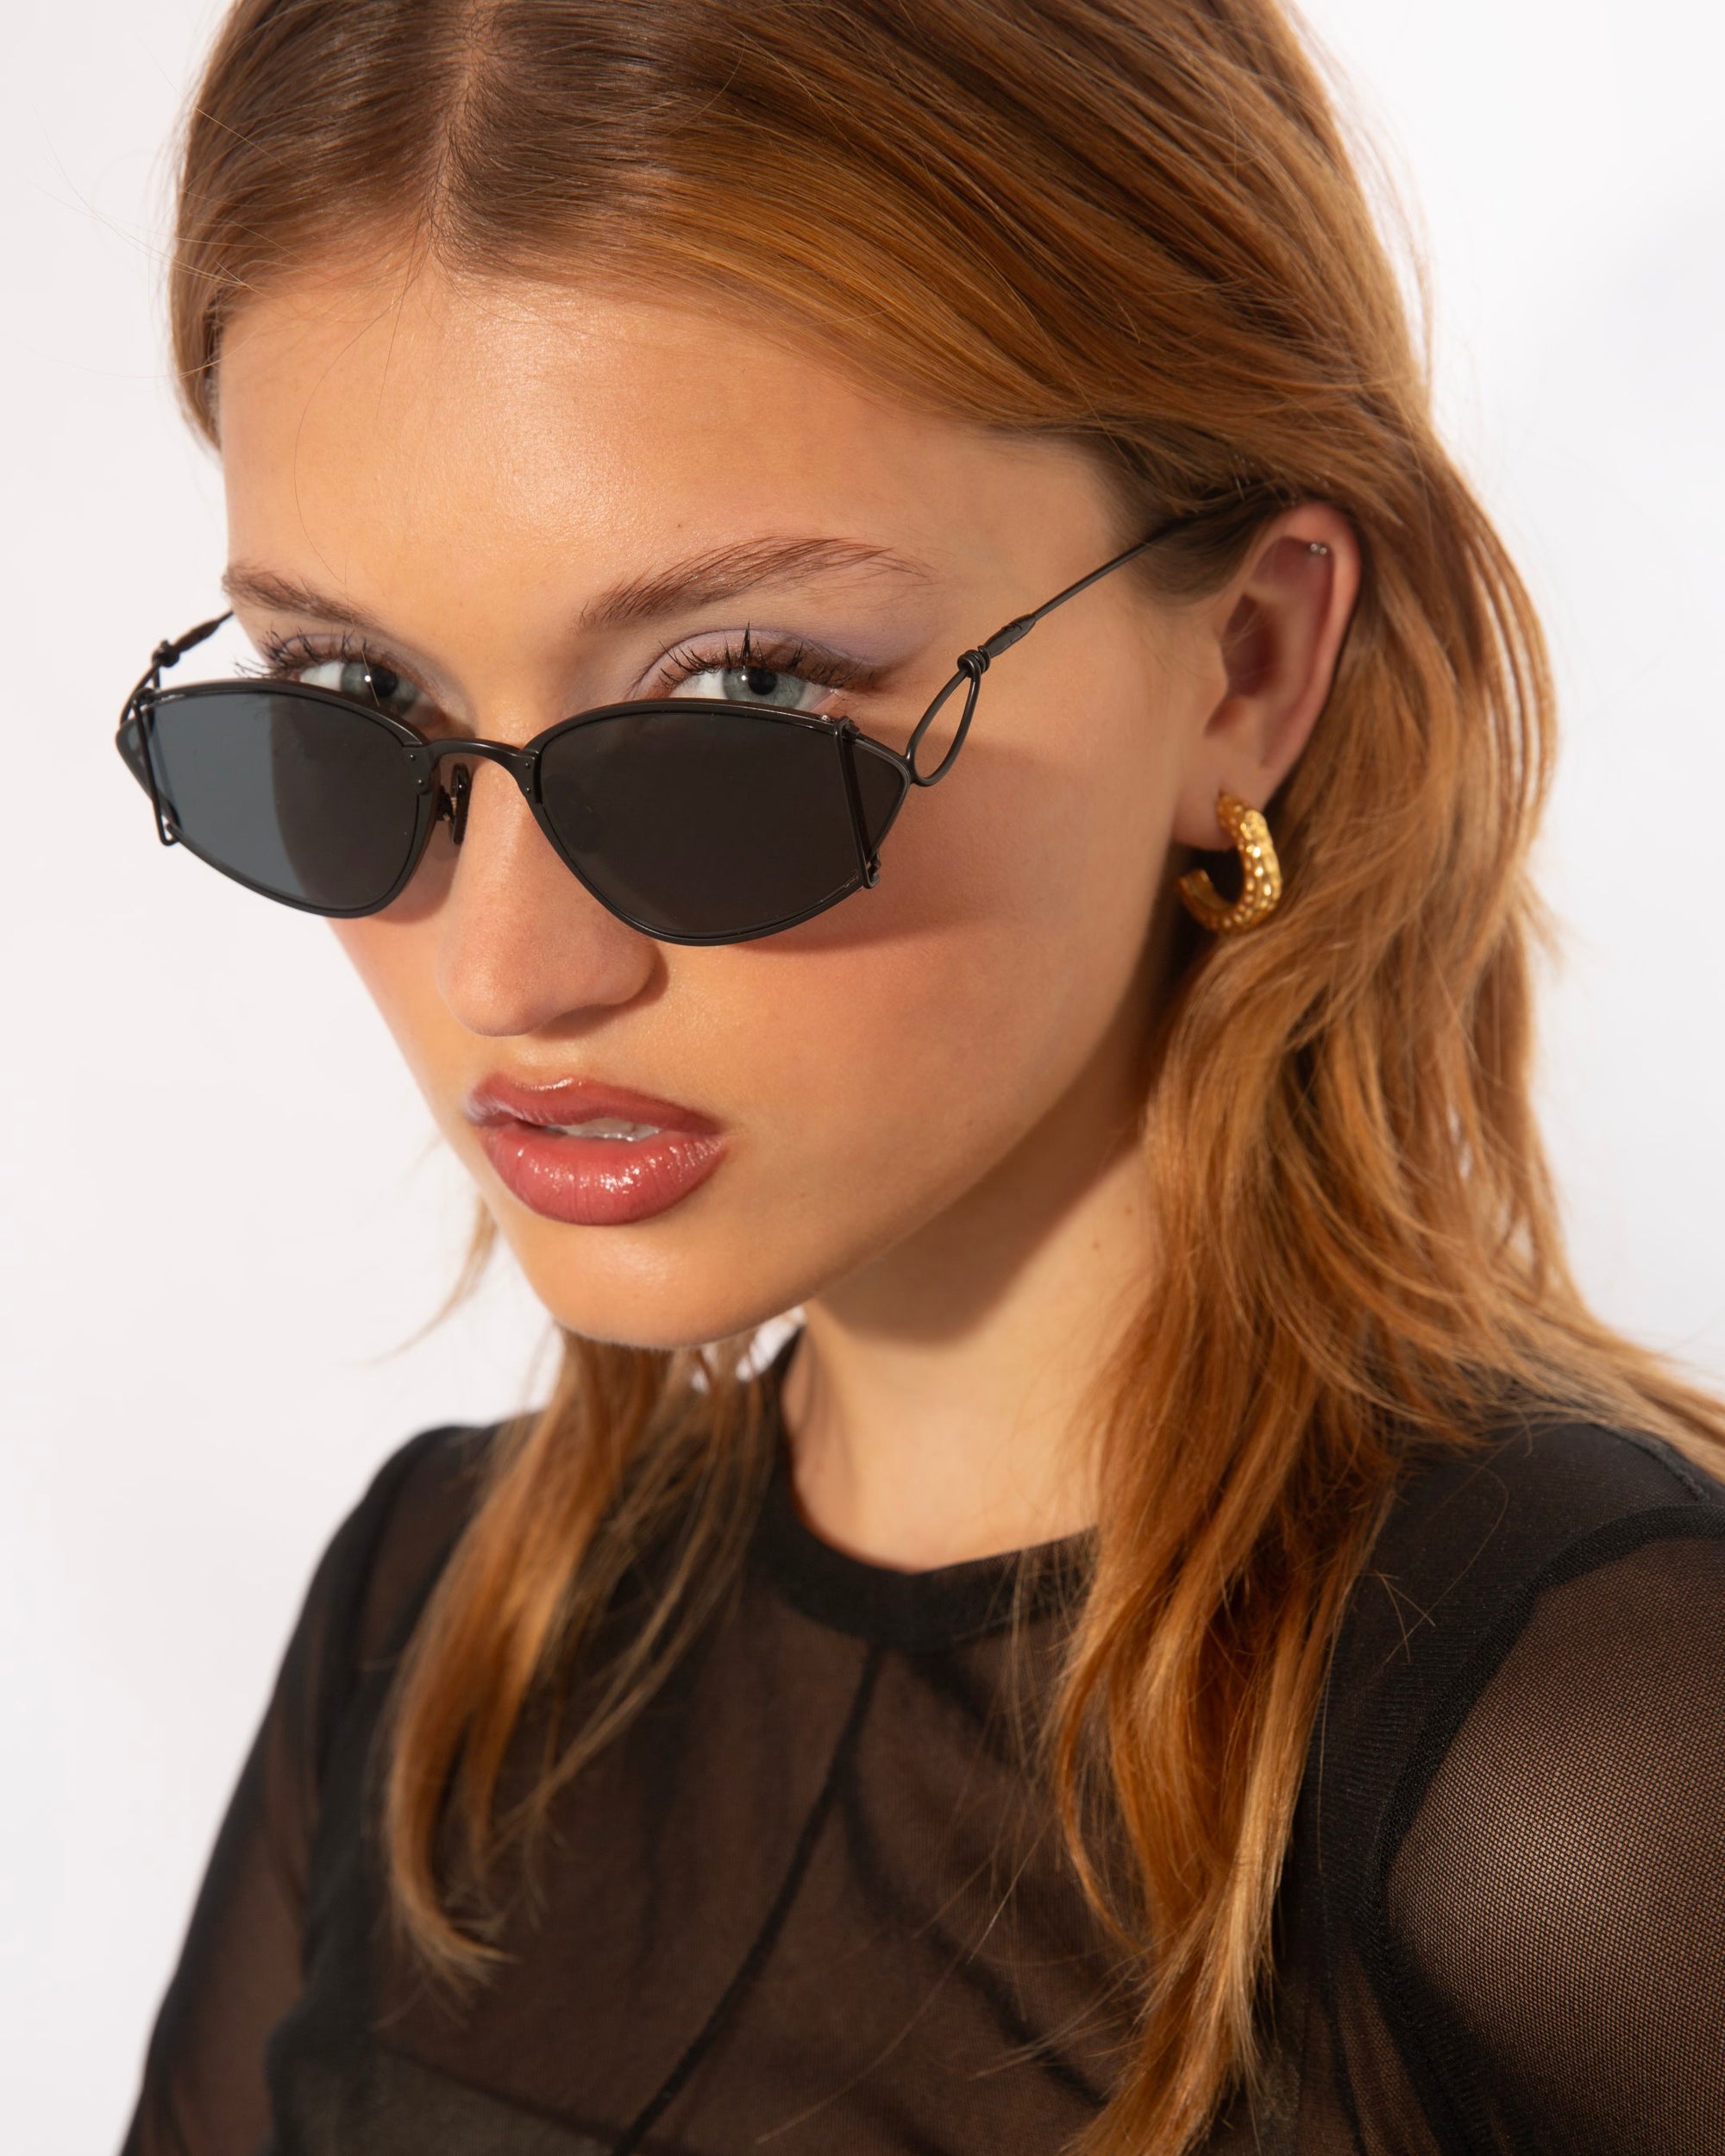 A woman with straight, shoulder-length auburn hair is wearing dark, angular For Art&#39;s Sake® Ornate sunglasses with ultra-lightweight nylon lenses offering 100% UVA &amp; UVB protection and 18-karat gold-plated hoop earrings. She has a serious expression and is dressed in a sheer black top against a plain white background.